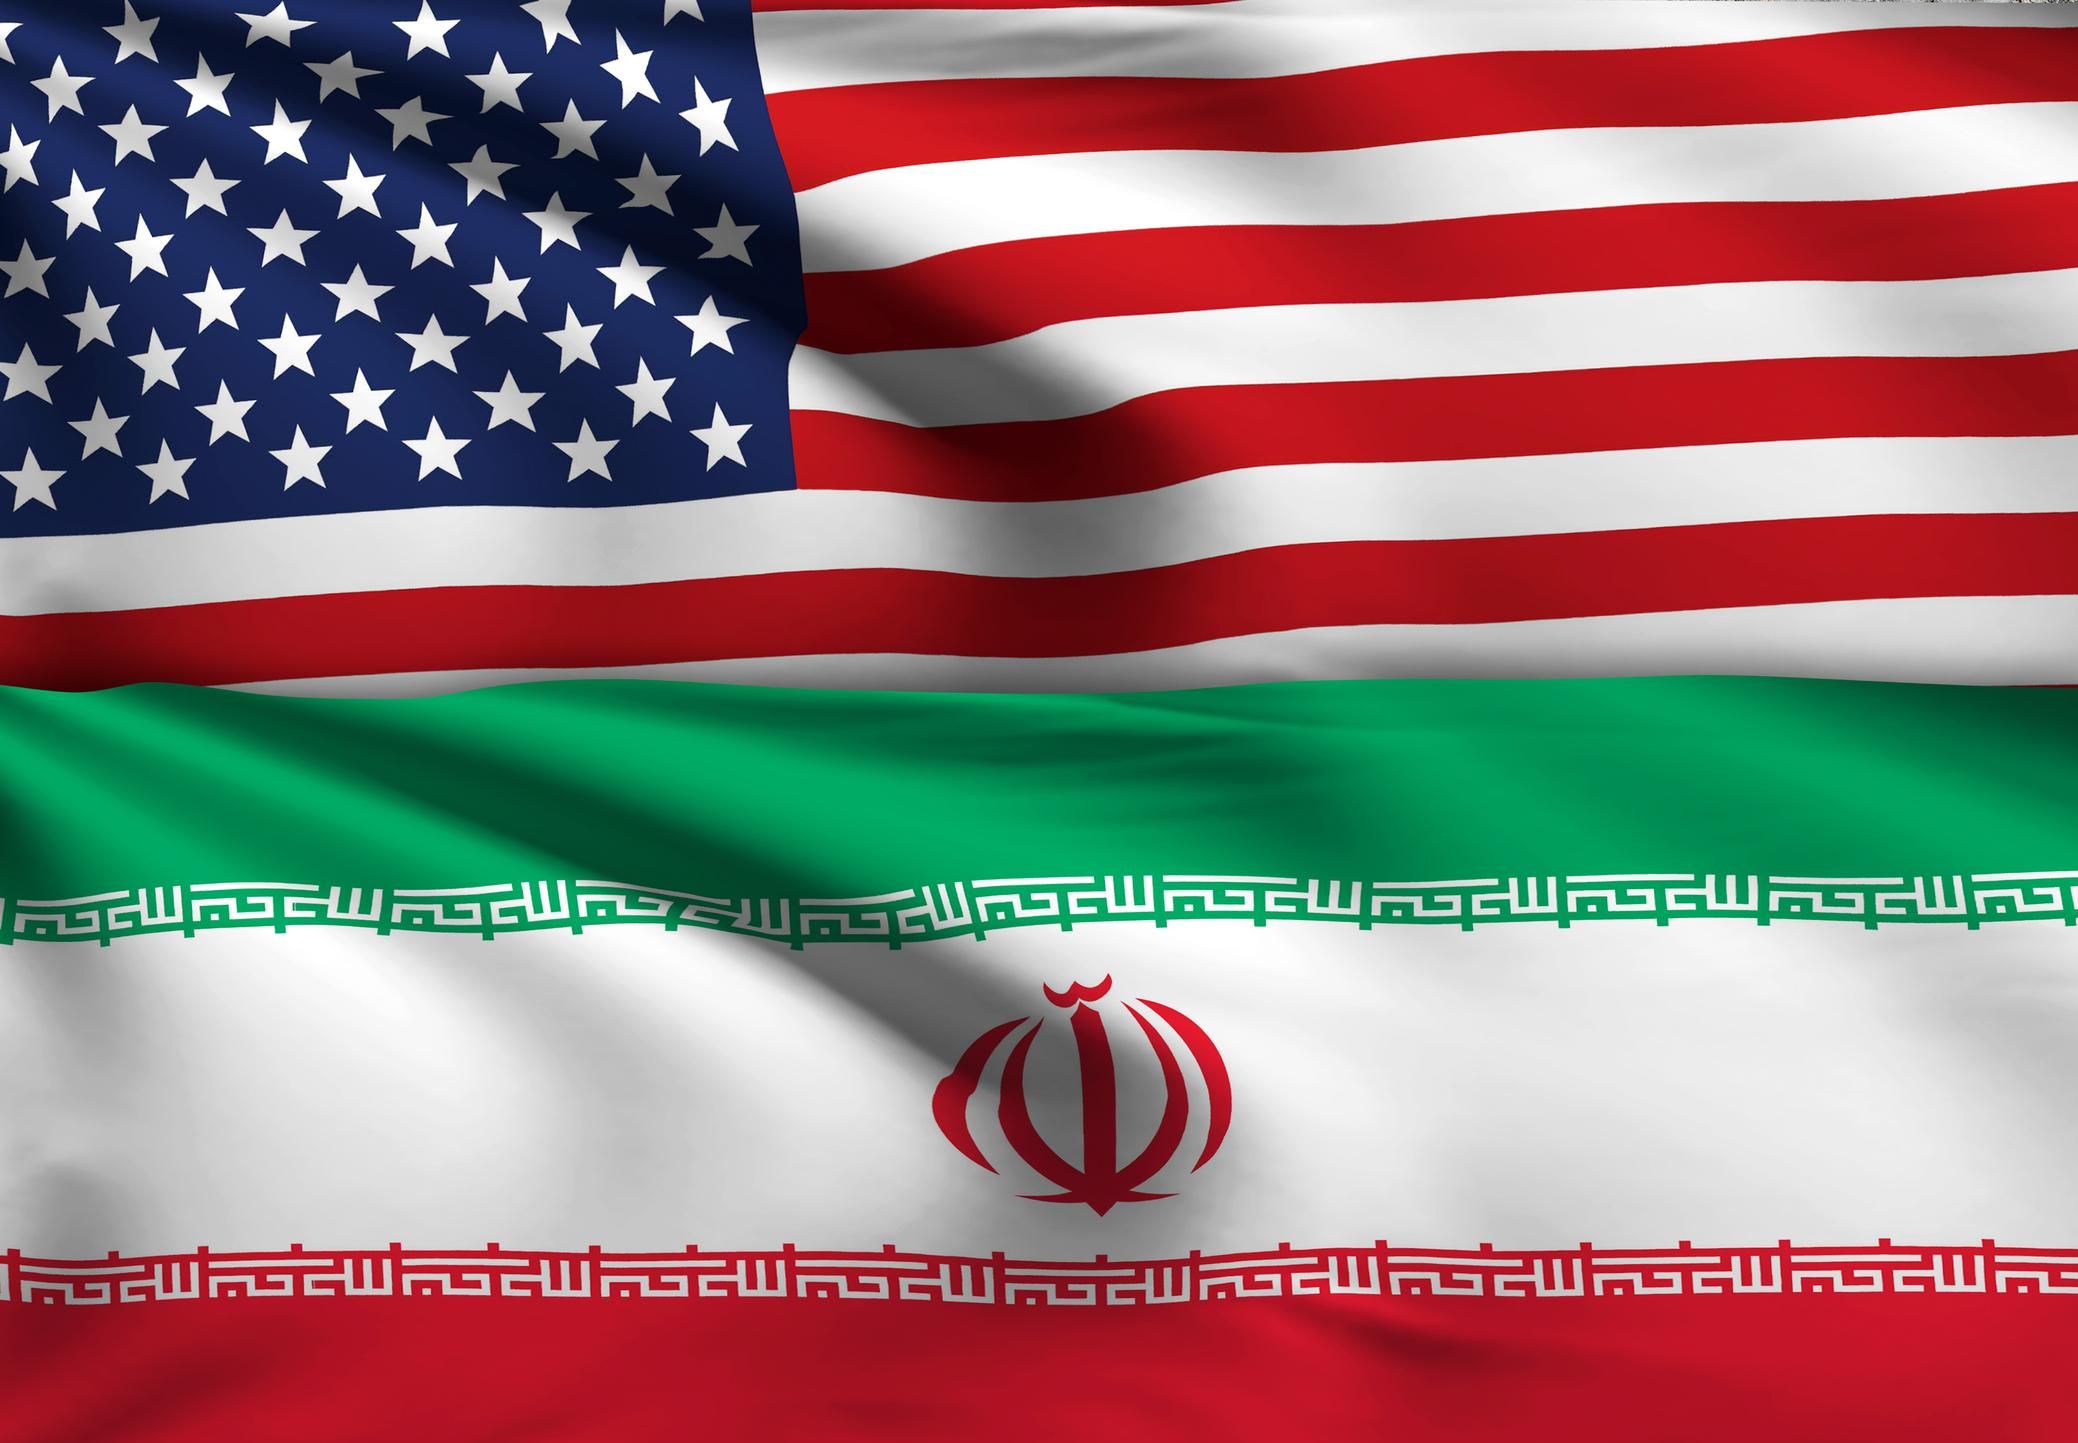 So long as Trump’s “sanctions wall” sanctions remain in place, there is no plausible way that the United States can provide effective sanctions relief to warrant Iran’s resumption of the nuclear constraints contained in the JCPOA. (Photo: Matt Anderson Photography/Getty/Stock photo)